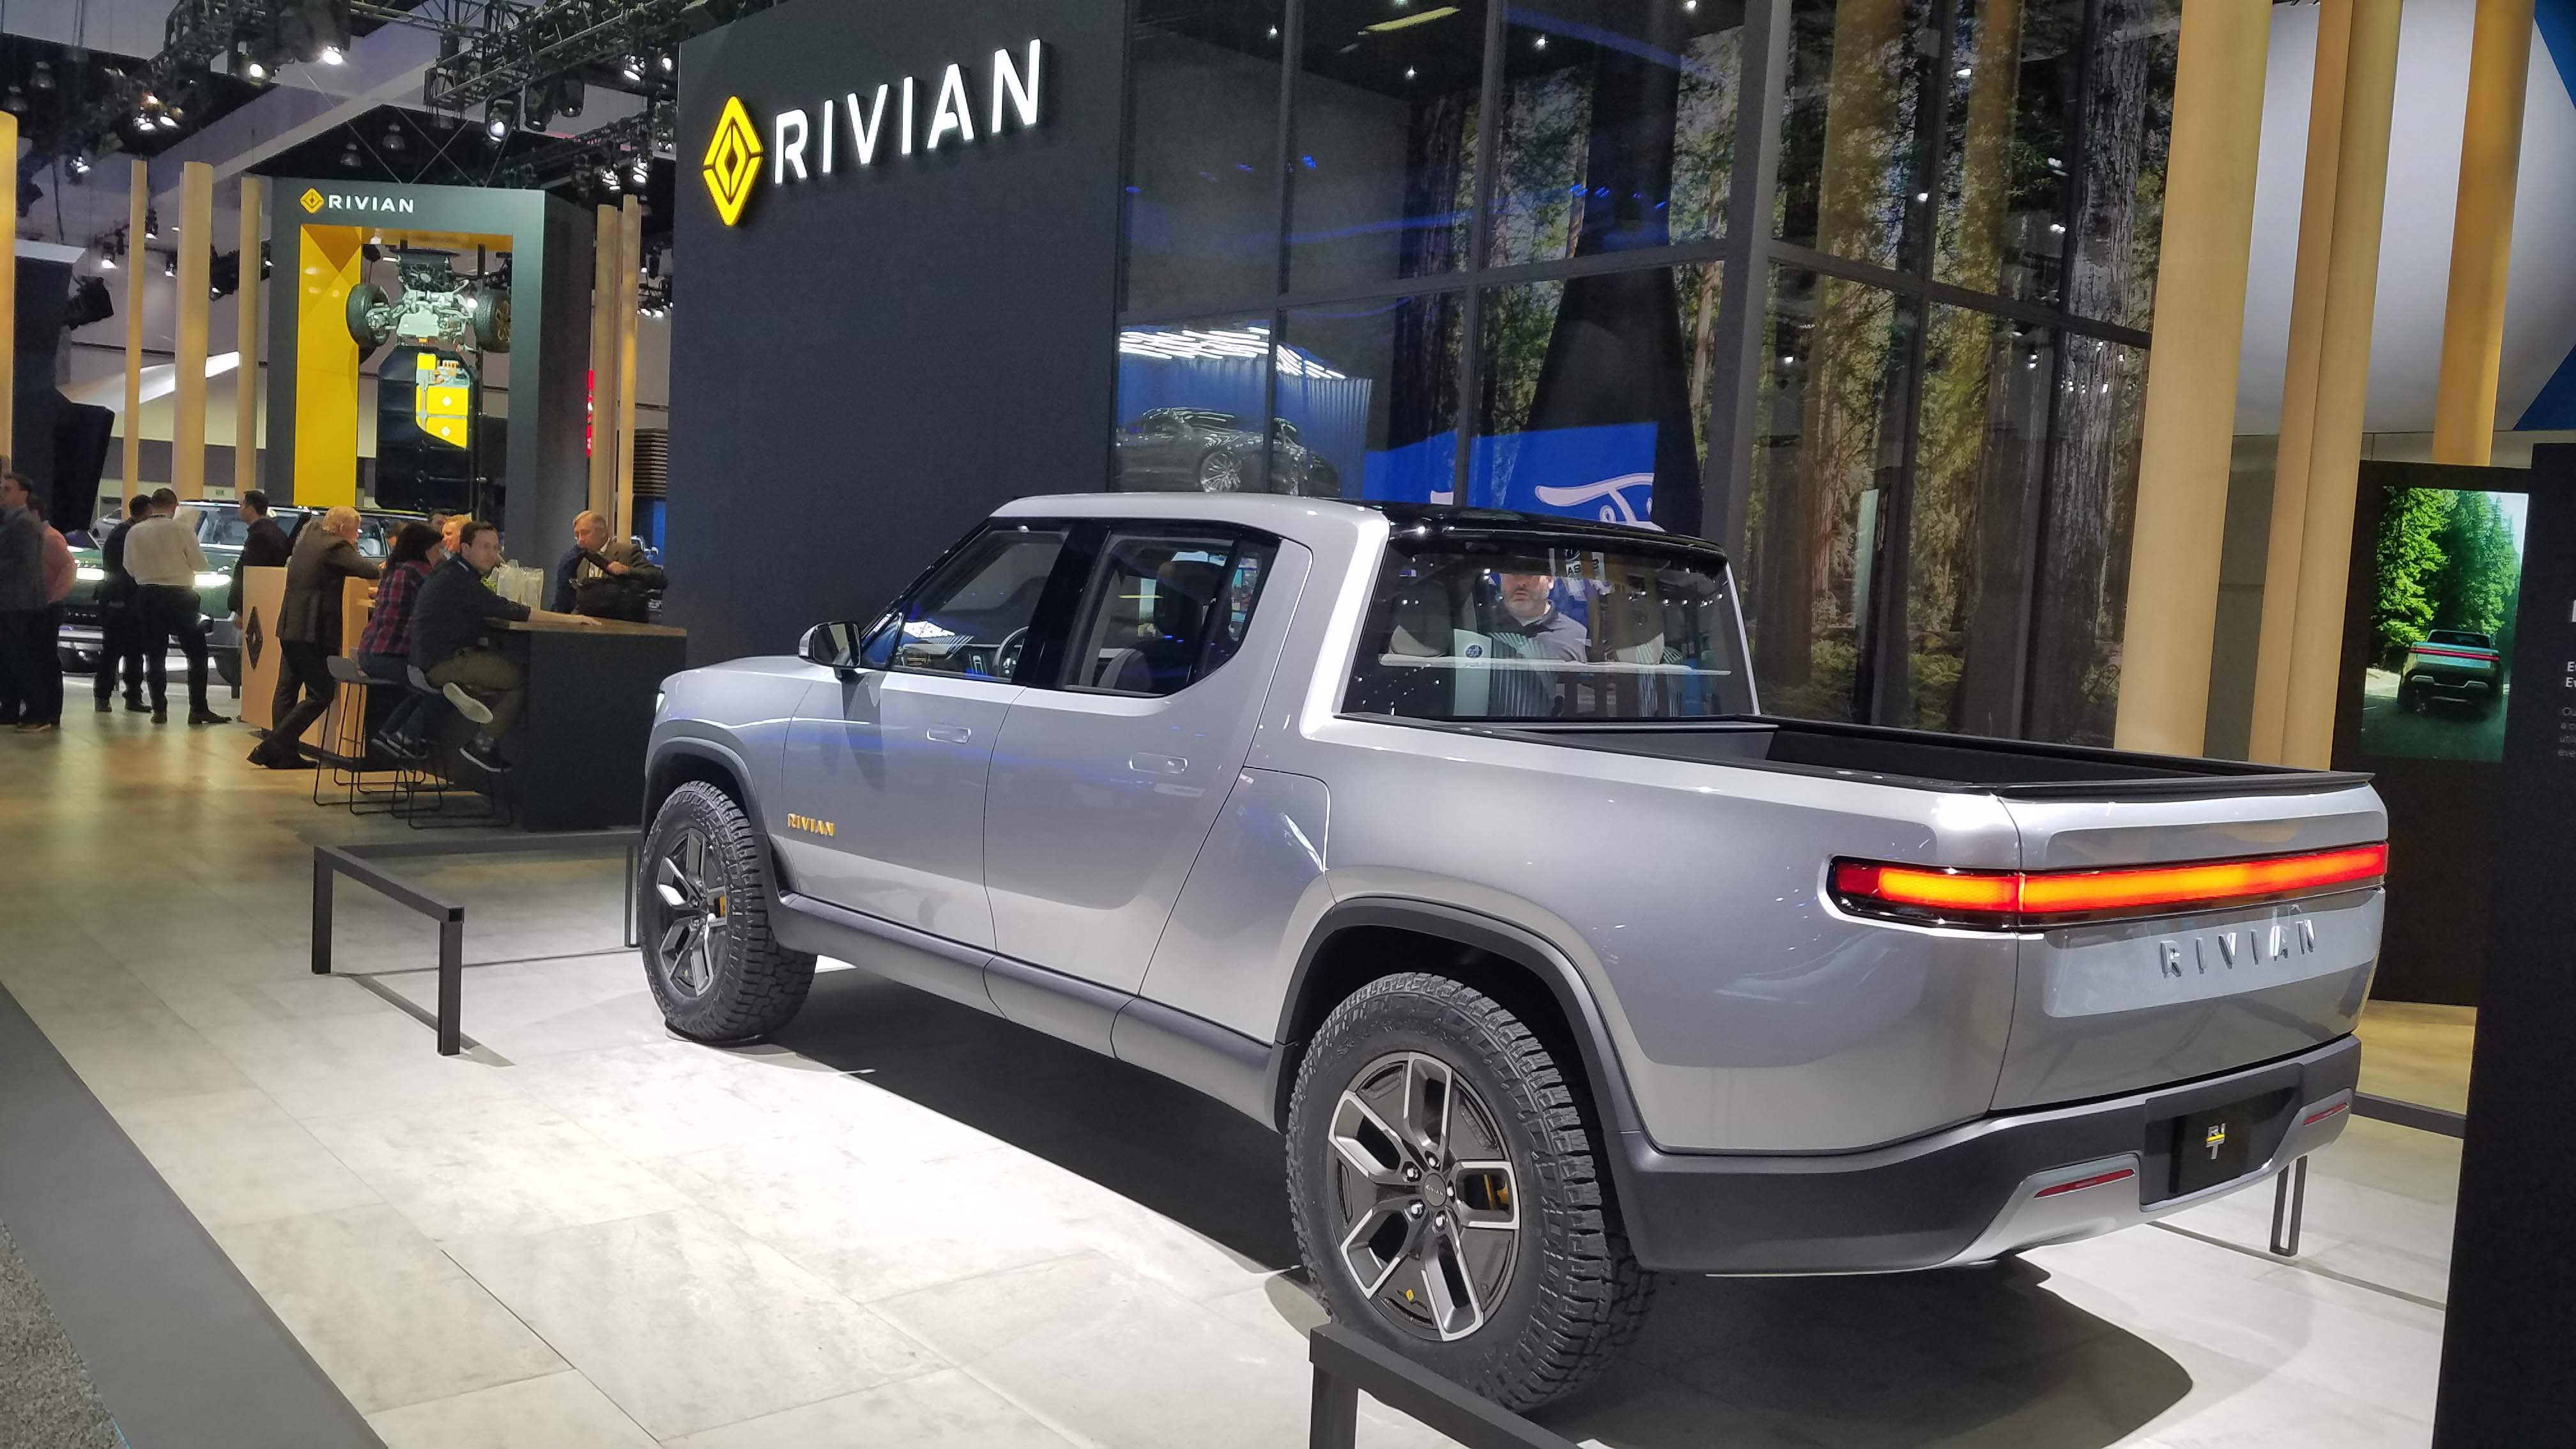 The Rivian R1T pickup and sister R1S SUV wowed the LA auto show last fall. The company is based in Plymouth, Mich. with a manufacturing plant in Normal, Ill.